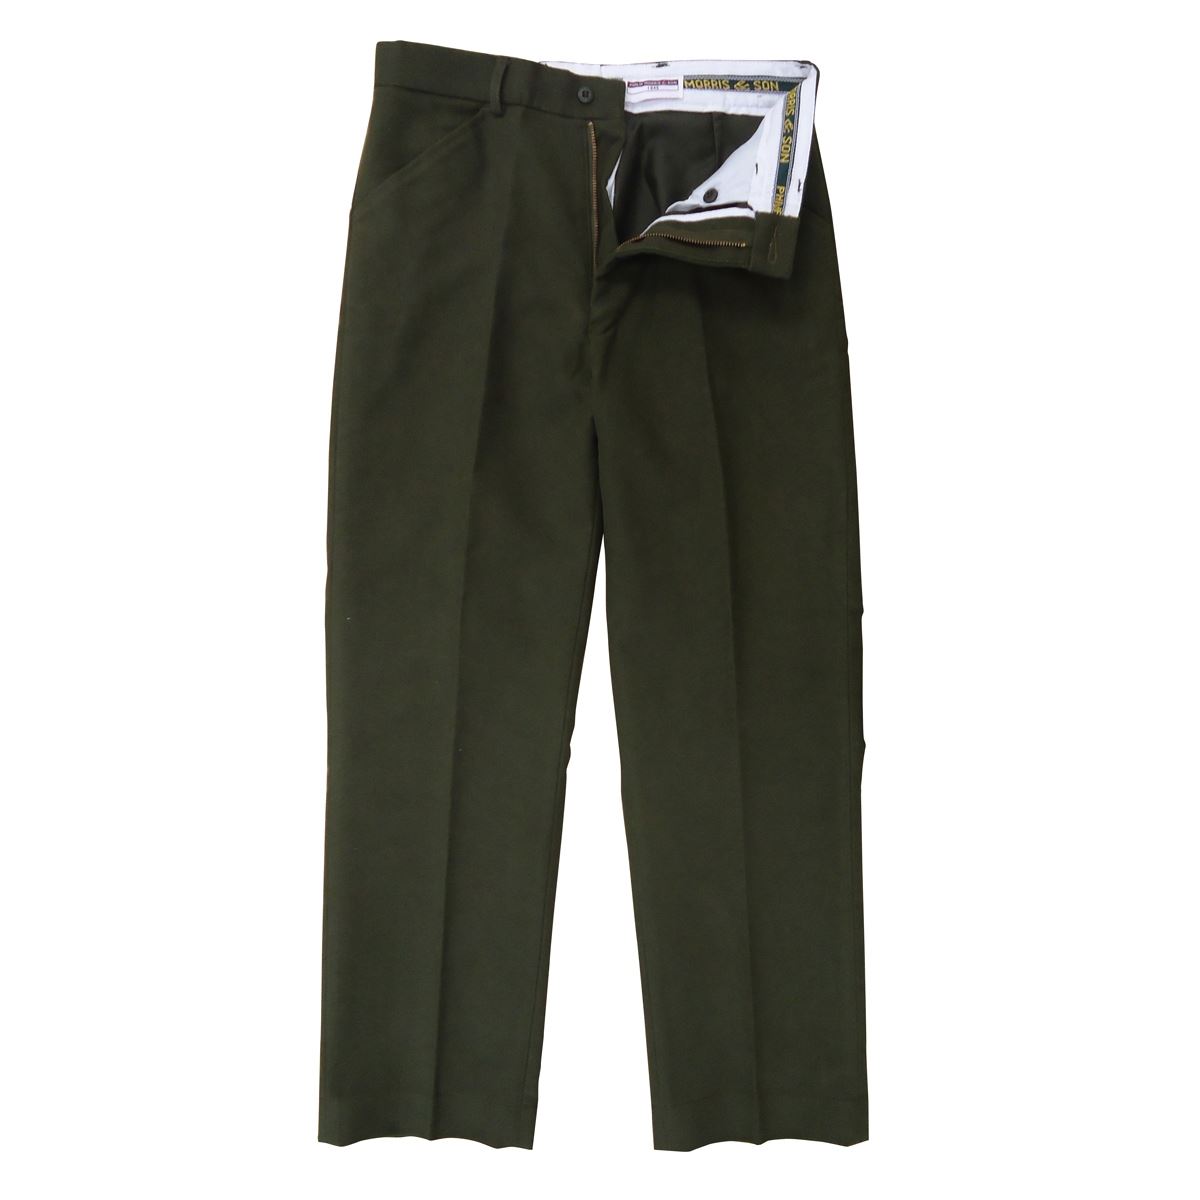 What is the reference number for the mens moleskin trousers, Heritage 1845?